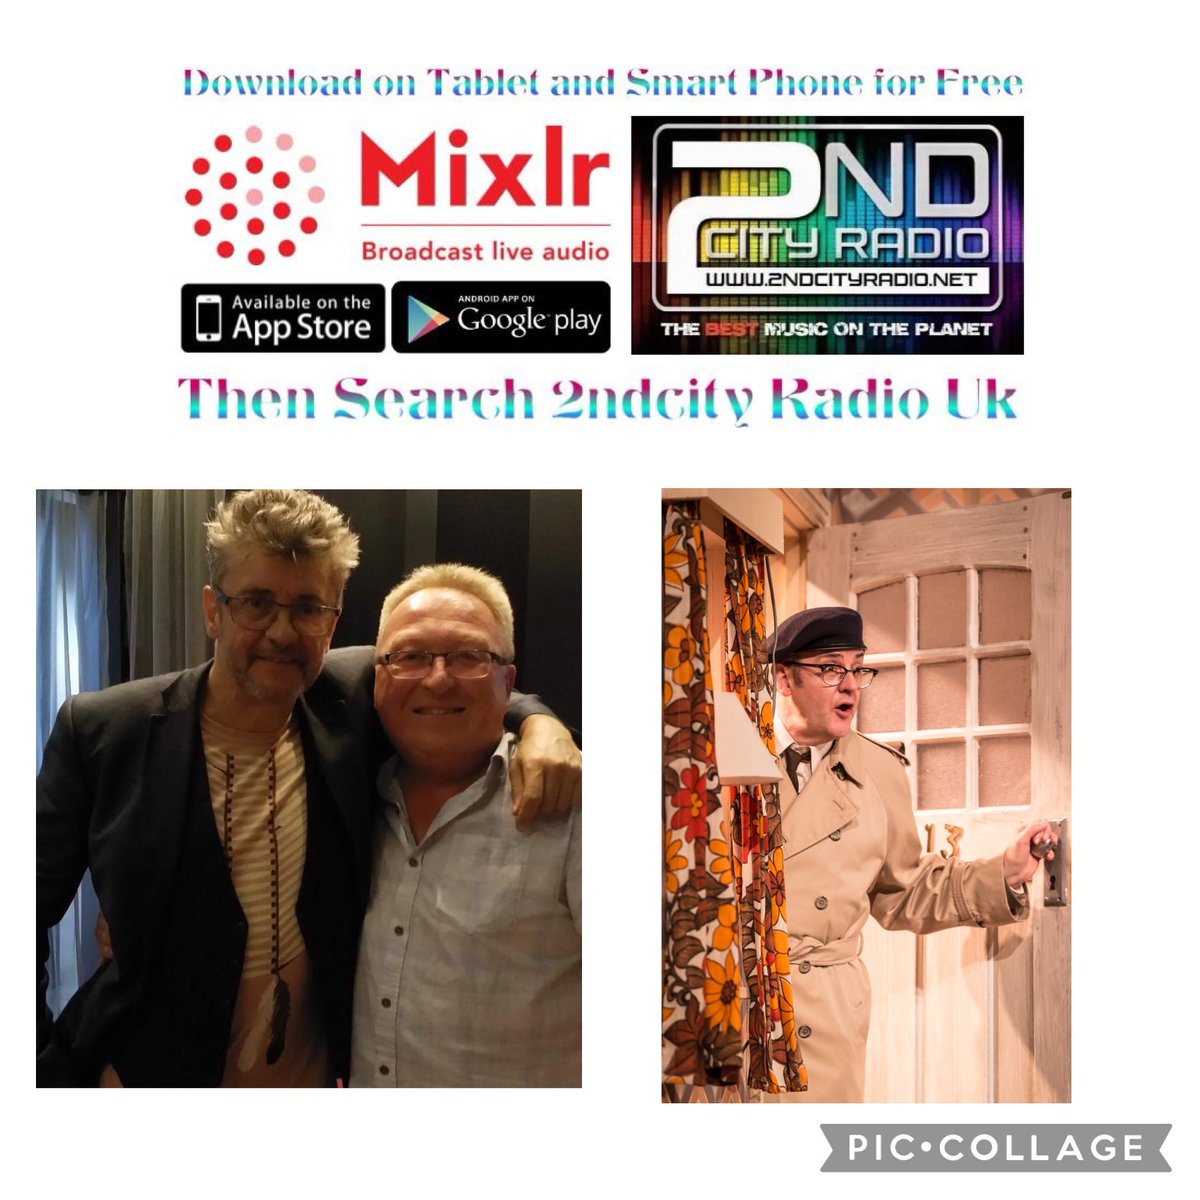 And to complete the guest line up this weekend, Joe Pasquale joins me to talk @somemothersuk #Backstage is live from midday on Sunday @SECONDCITYRADIO 2ndcityradio.net
#theatre @AmandaMalpass #JoePasquale #somemothersdoaveem    #comedy